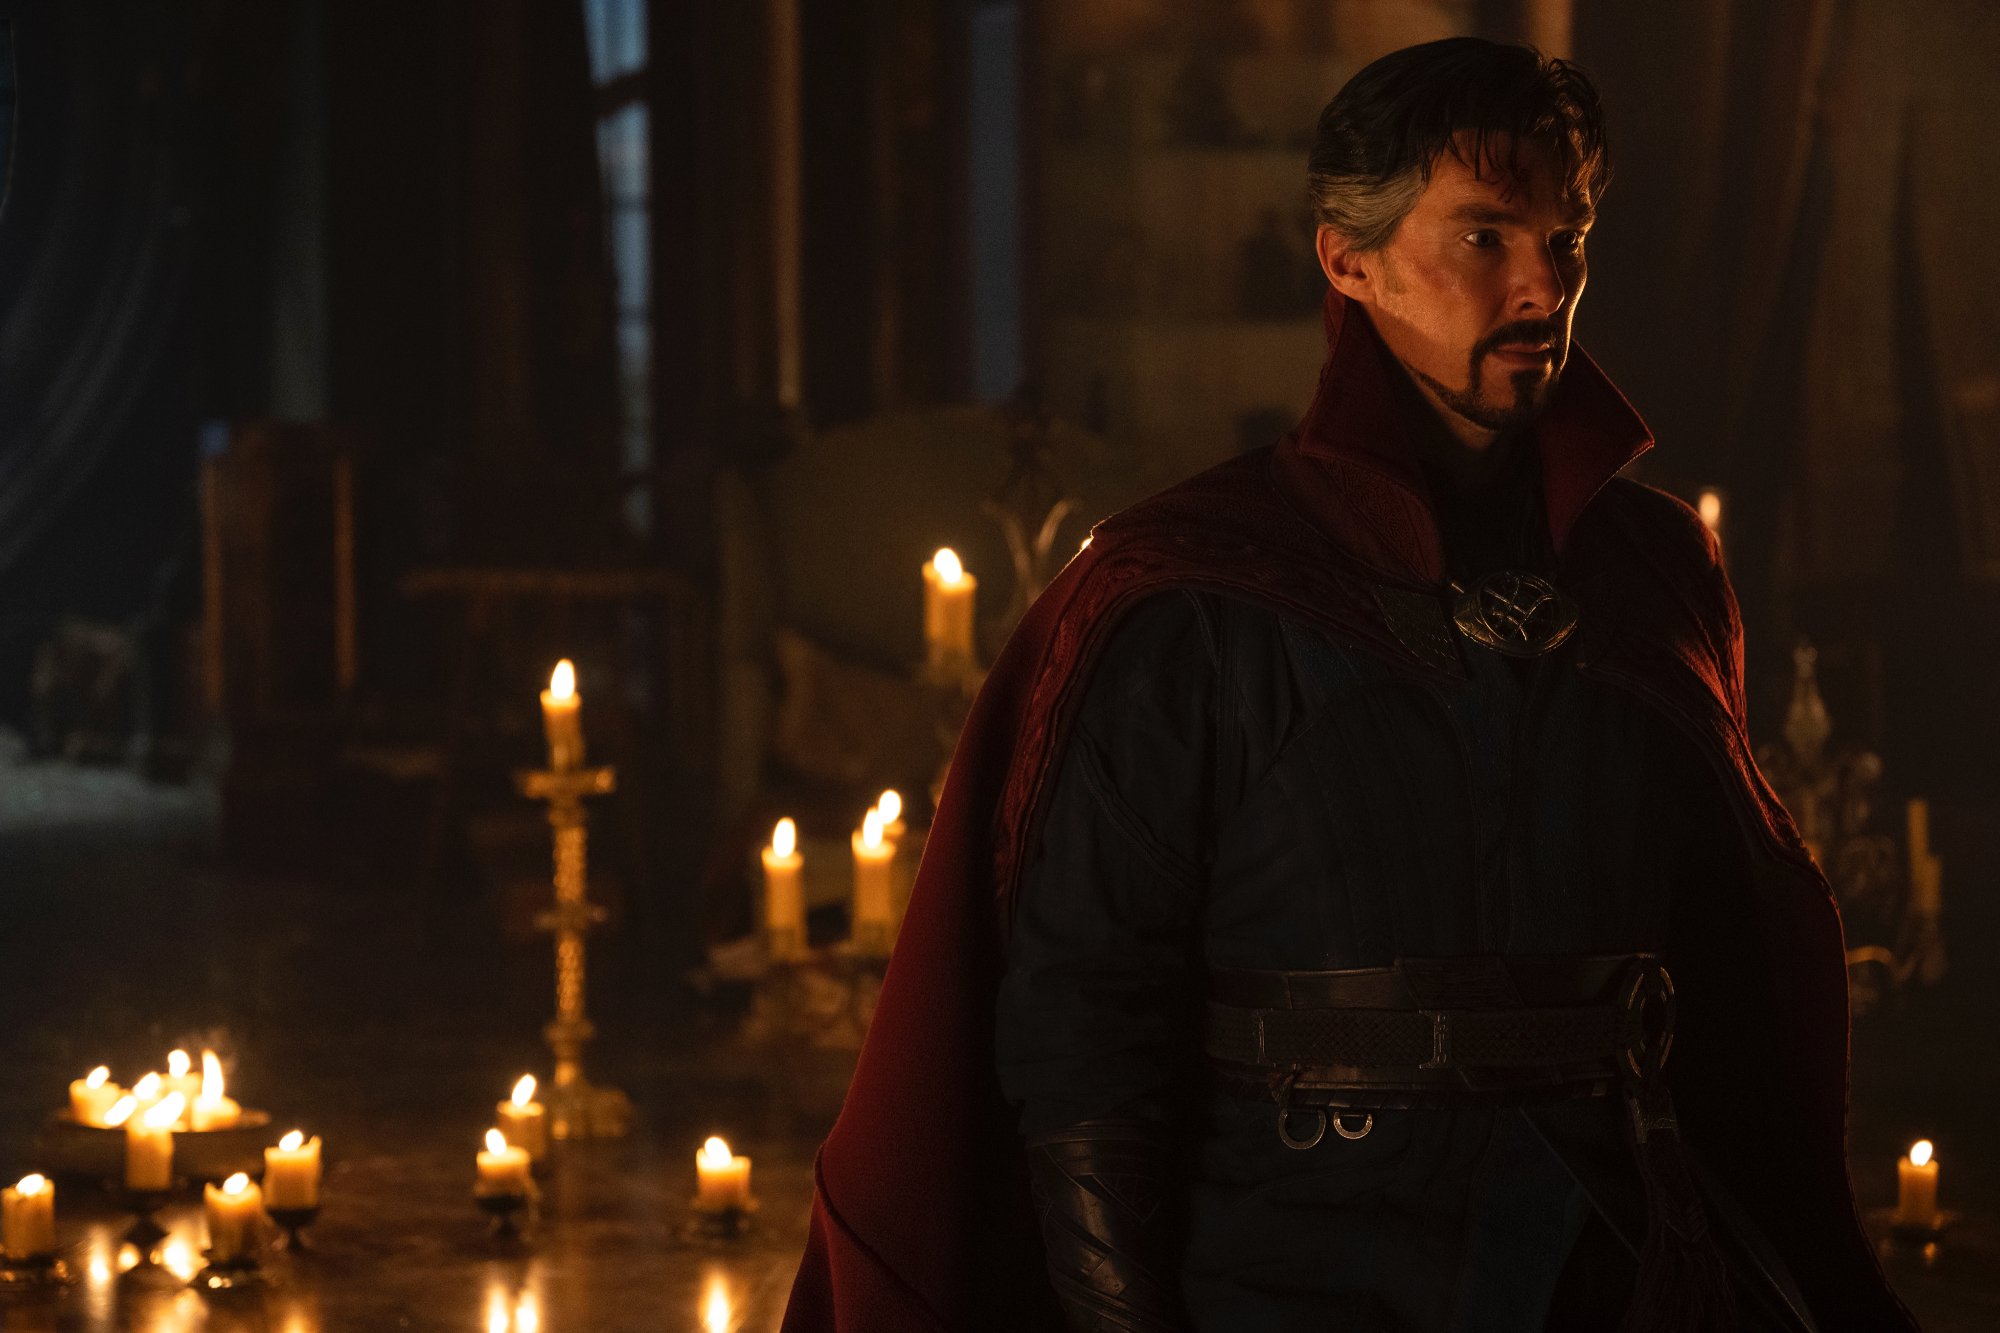 'Doctor Strange in the Multiverse of Madness' Benedict Cumberbatch as Dr. Stephen Strange standing in a dark room full of candles in the background